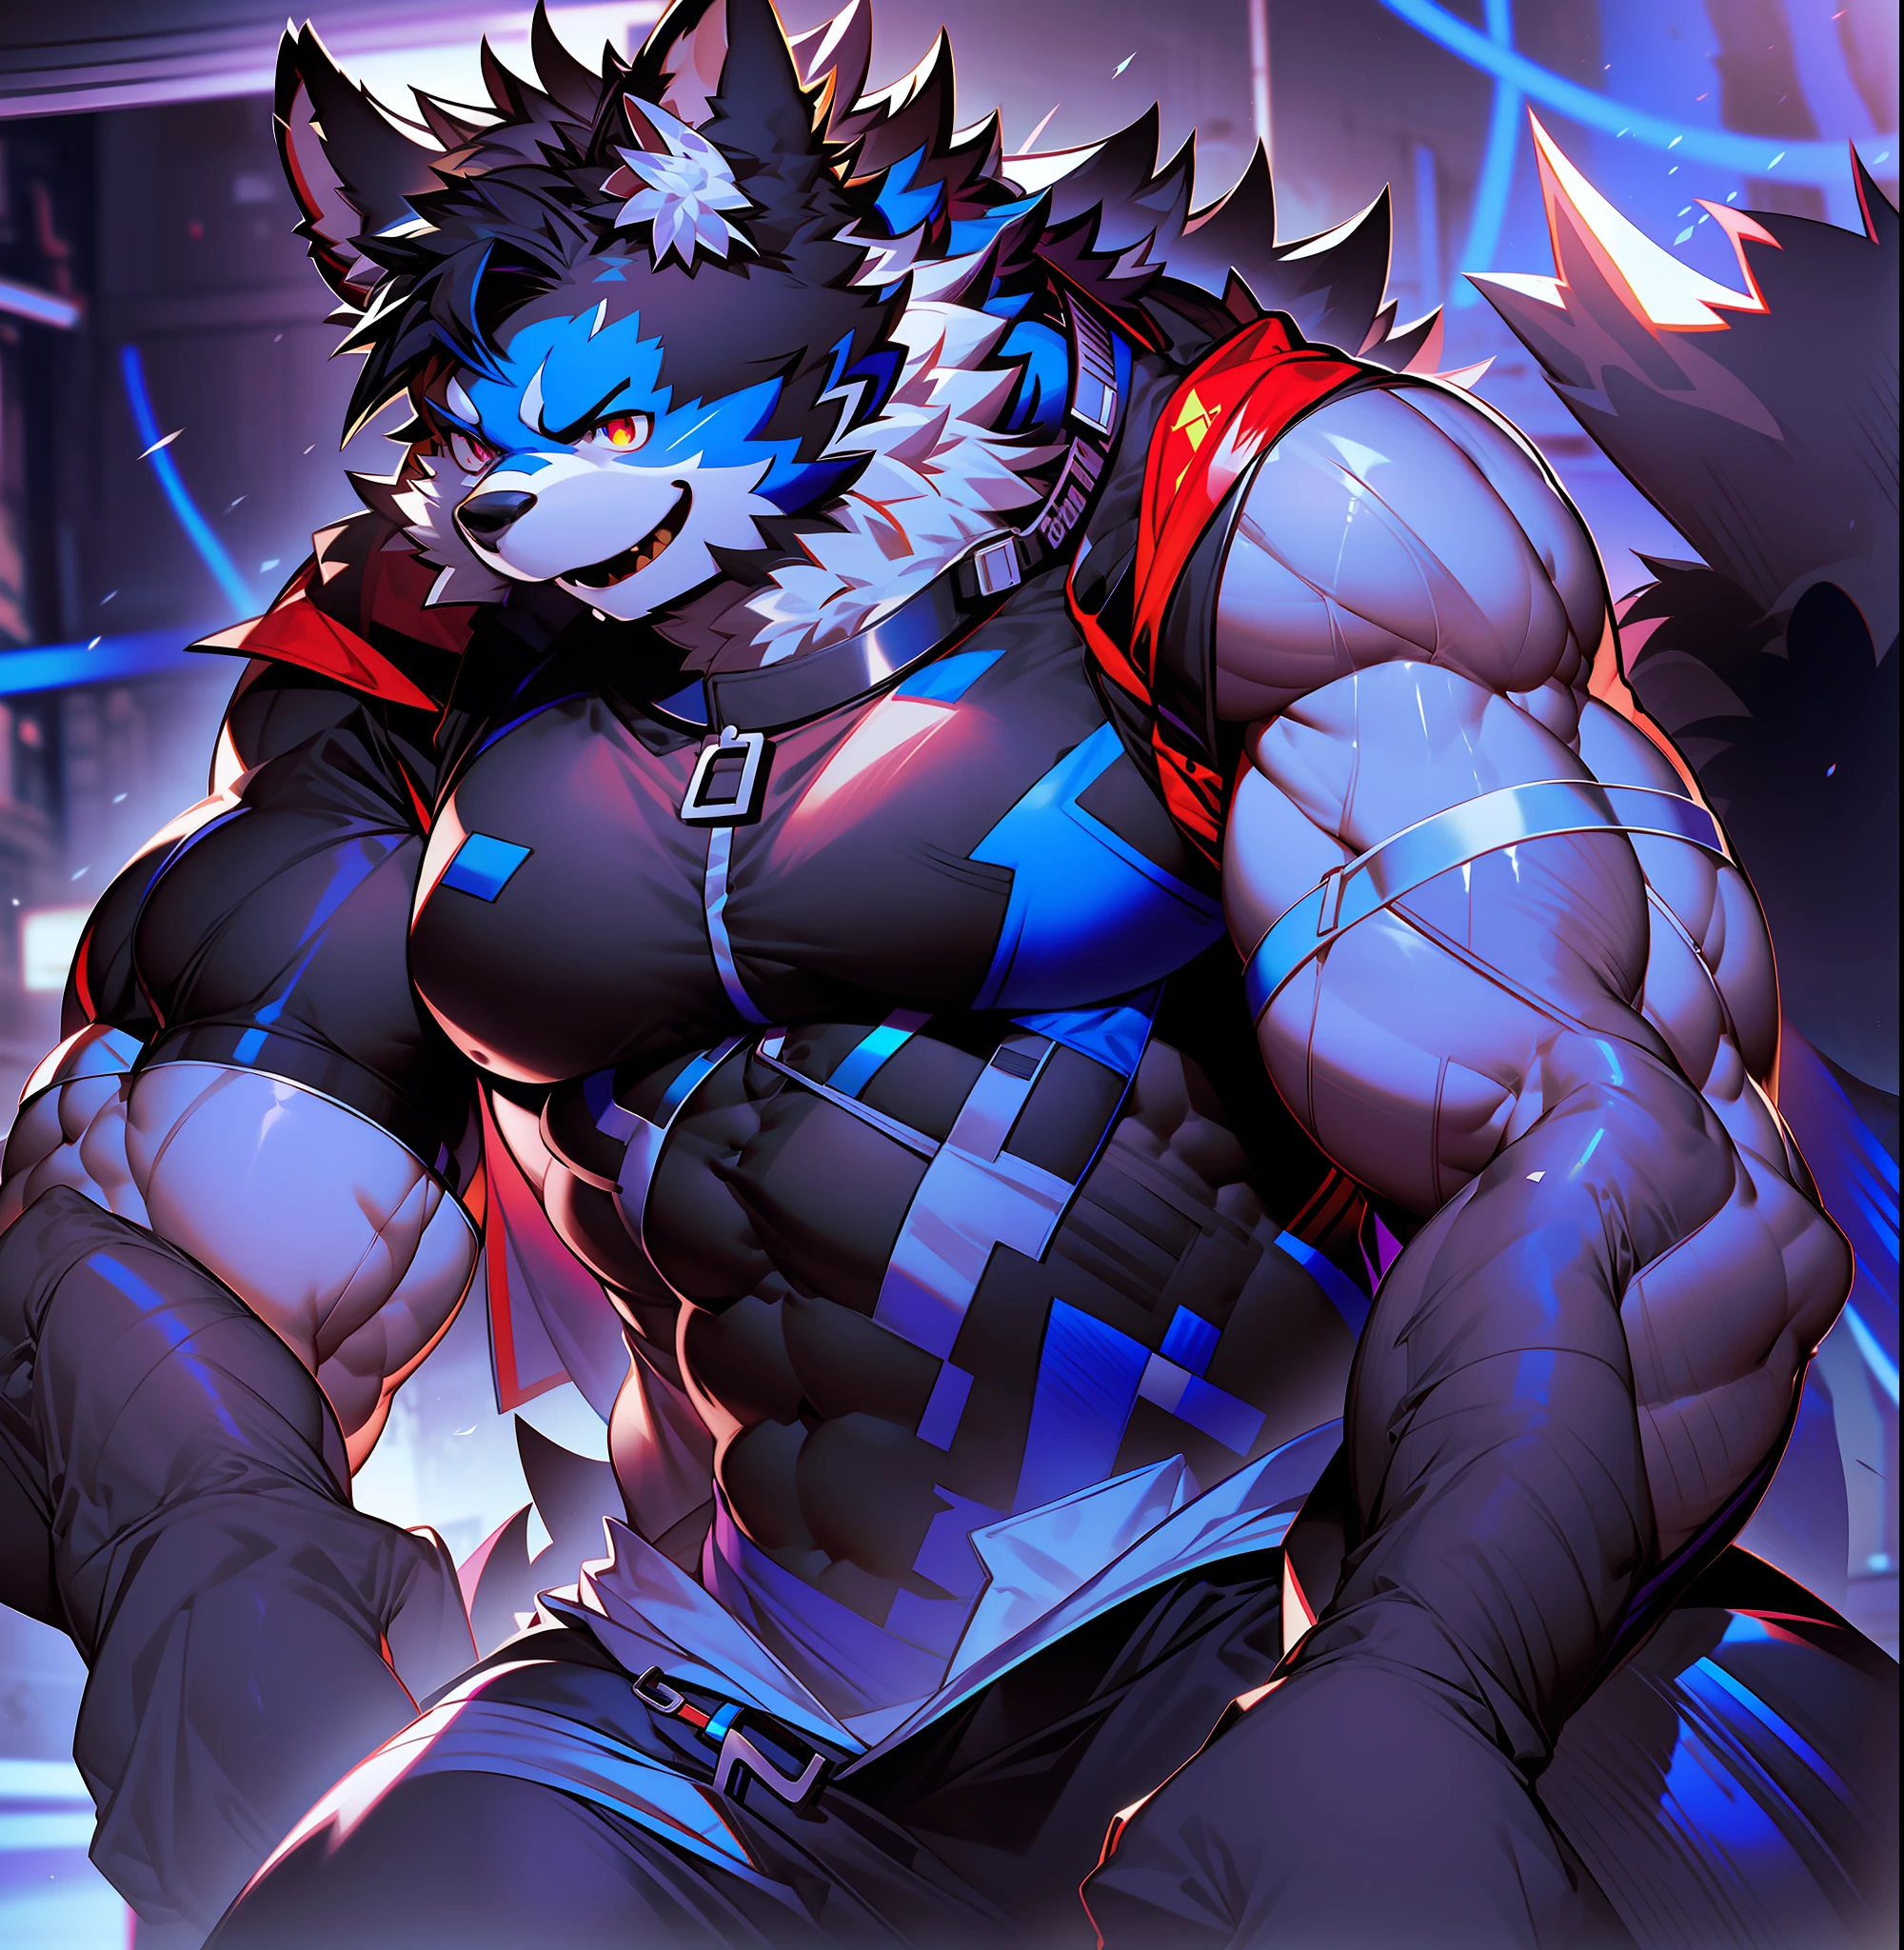 coyote，Furry，Blue pattern，Black hair，musculature，Muscle men，nakeness，Strong，ultraclear，Has a large ，Collar，Black  shorts，Black sclera，red pupils，Abs，Yellow coat，The erection，Collar，Has a large ，der riese，olo，Stout arms，Storm jacket，Badge，Pronounced abs，ssmile，lbeard，Dim lighting，Dark atmosphere，subway station background，Dim light，Urban style，hold fists,Big Dick